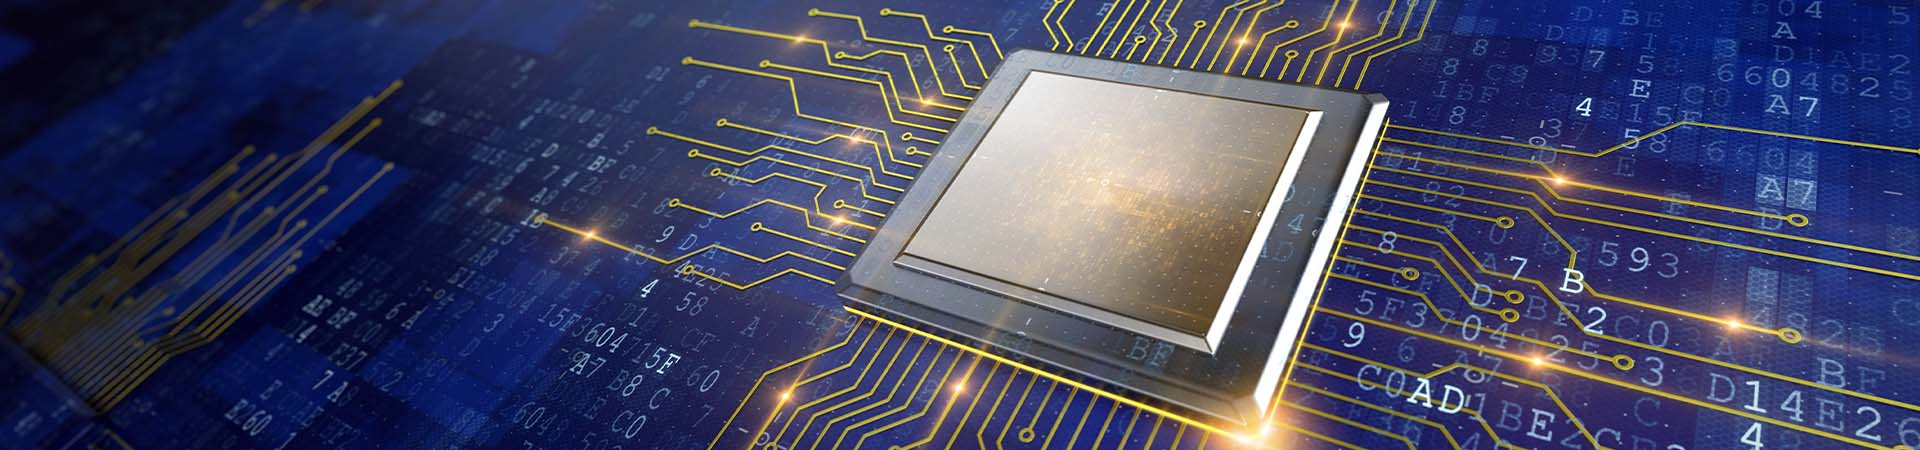 Stylized integrated circuit design on top of blue printed circuit board (PCB).